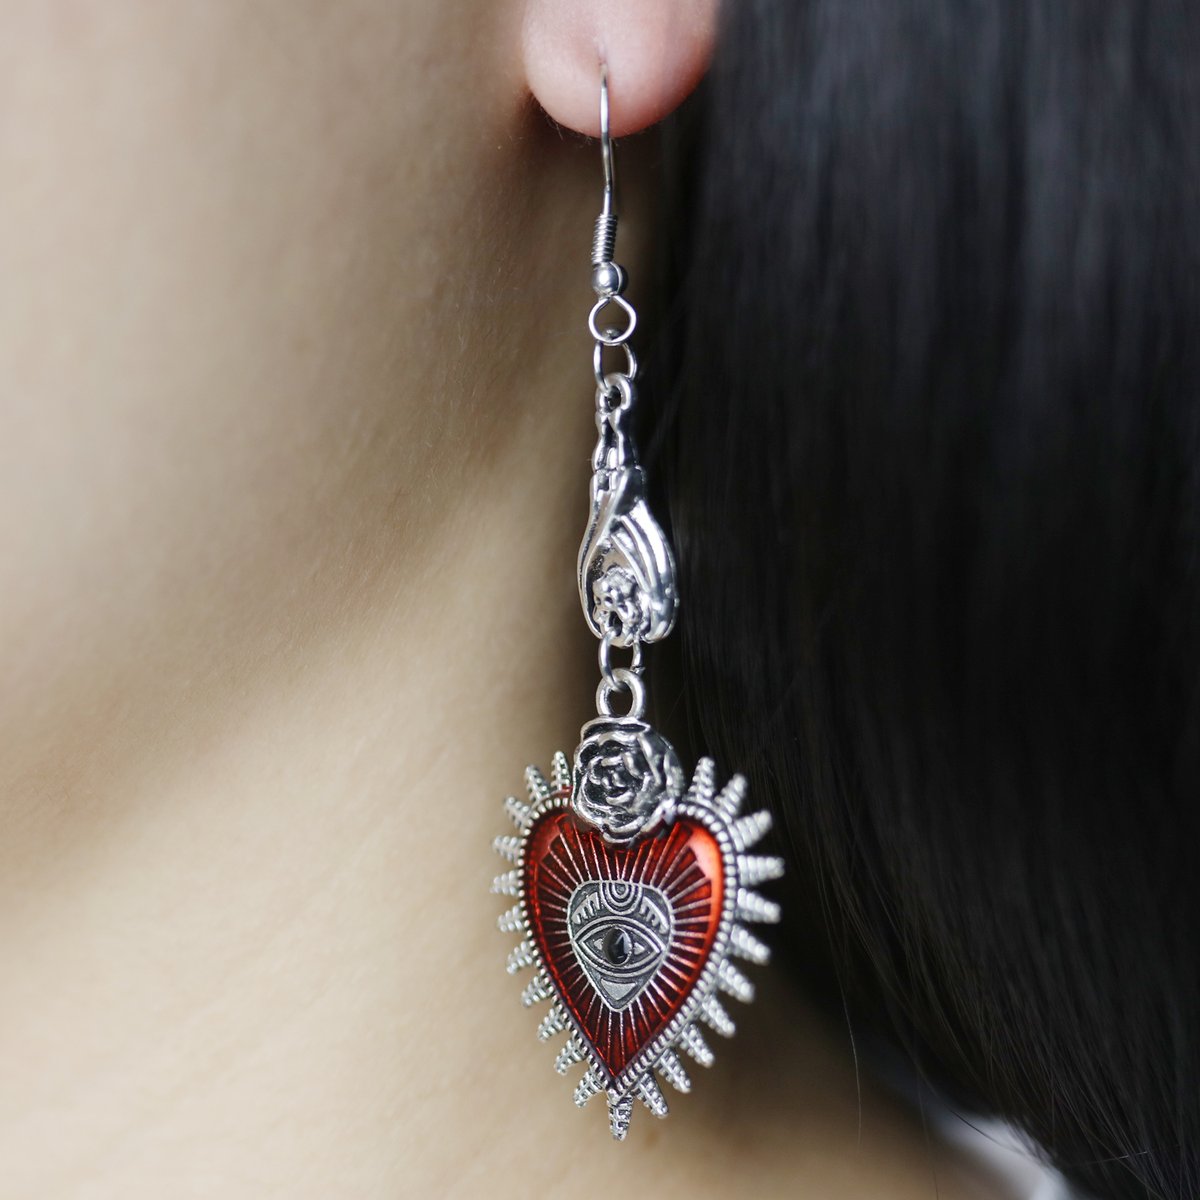 Scarlet Eye Earrings

The Scarlet Eye Pendant are earrings with a mystical and fantastical vibe, its main shape inspired by the Eye of Horus and the upside down bat.

ticopr.com/collections/al…

#darkjewelry #baroque #darkdesign #gothicstyle #gothicfashion #punk #punkfashion